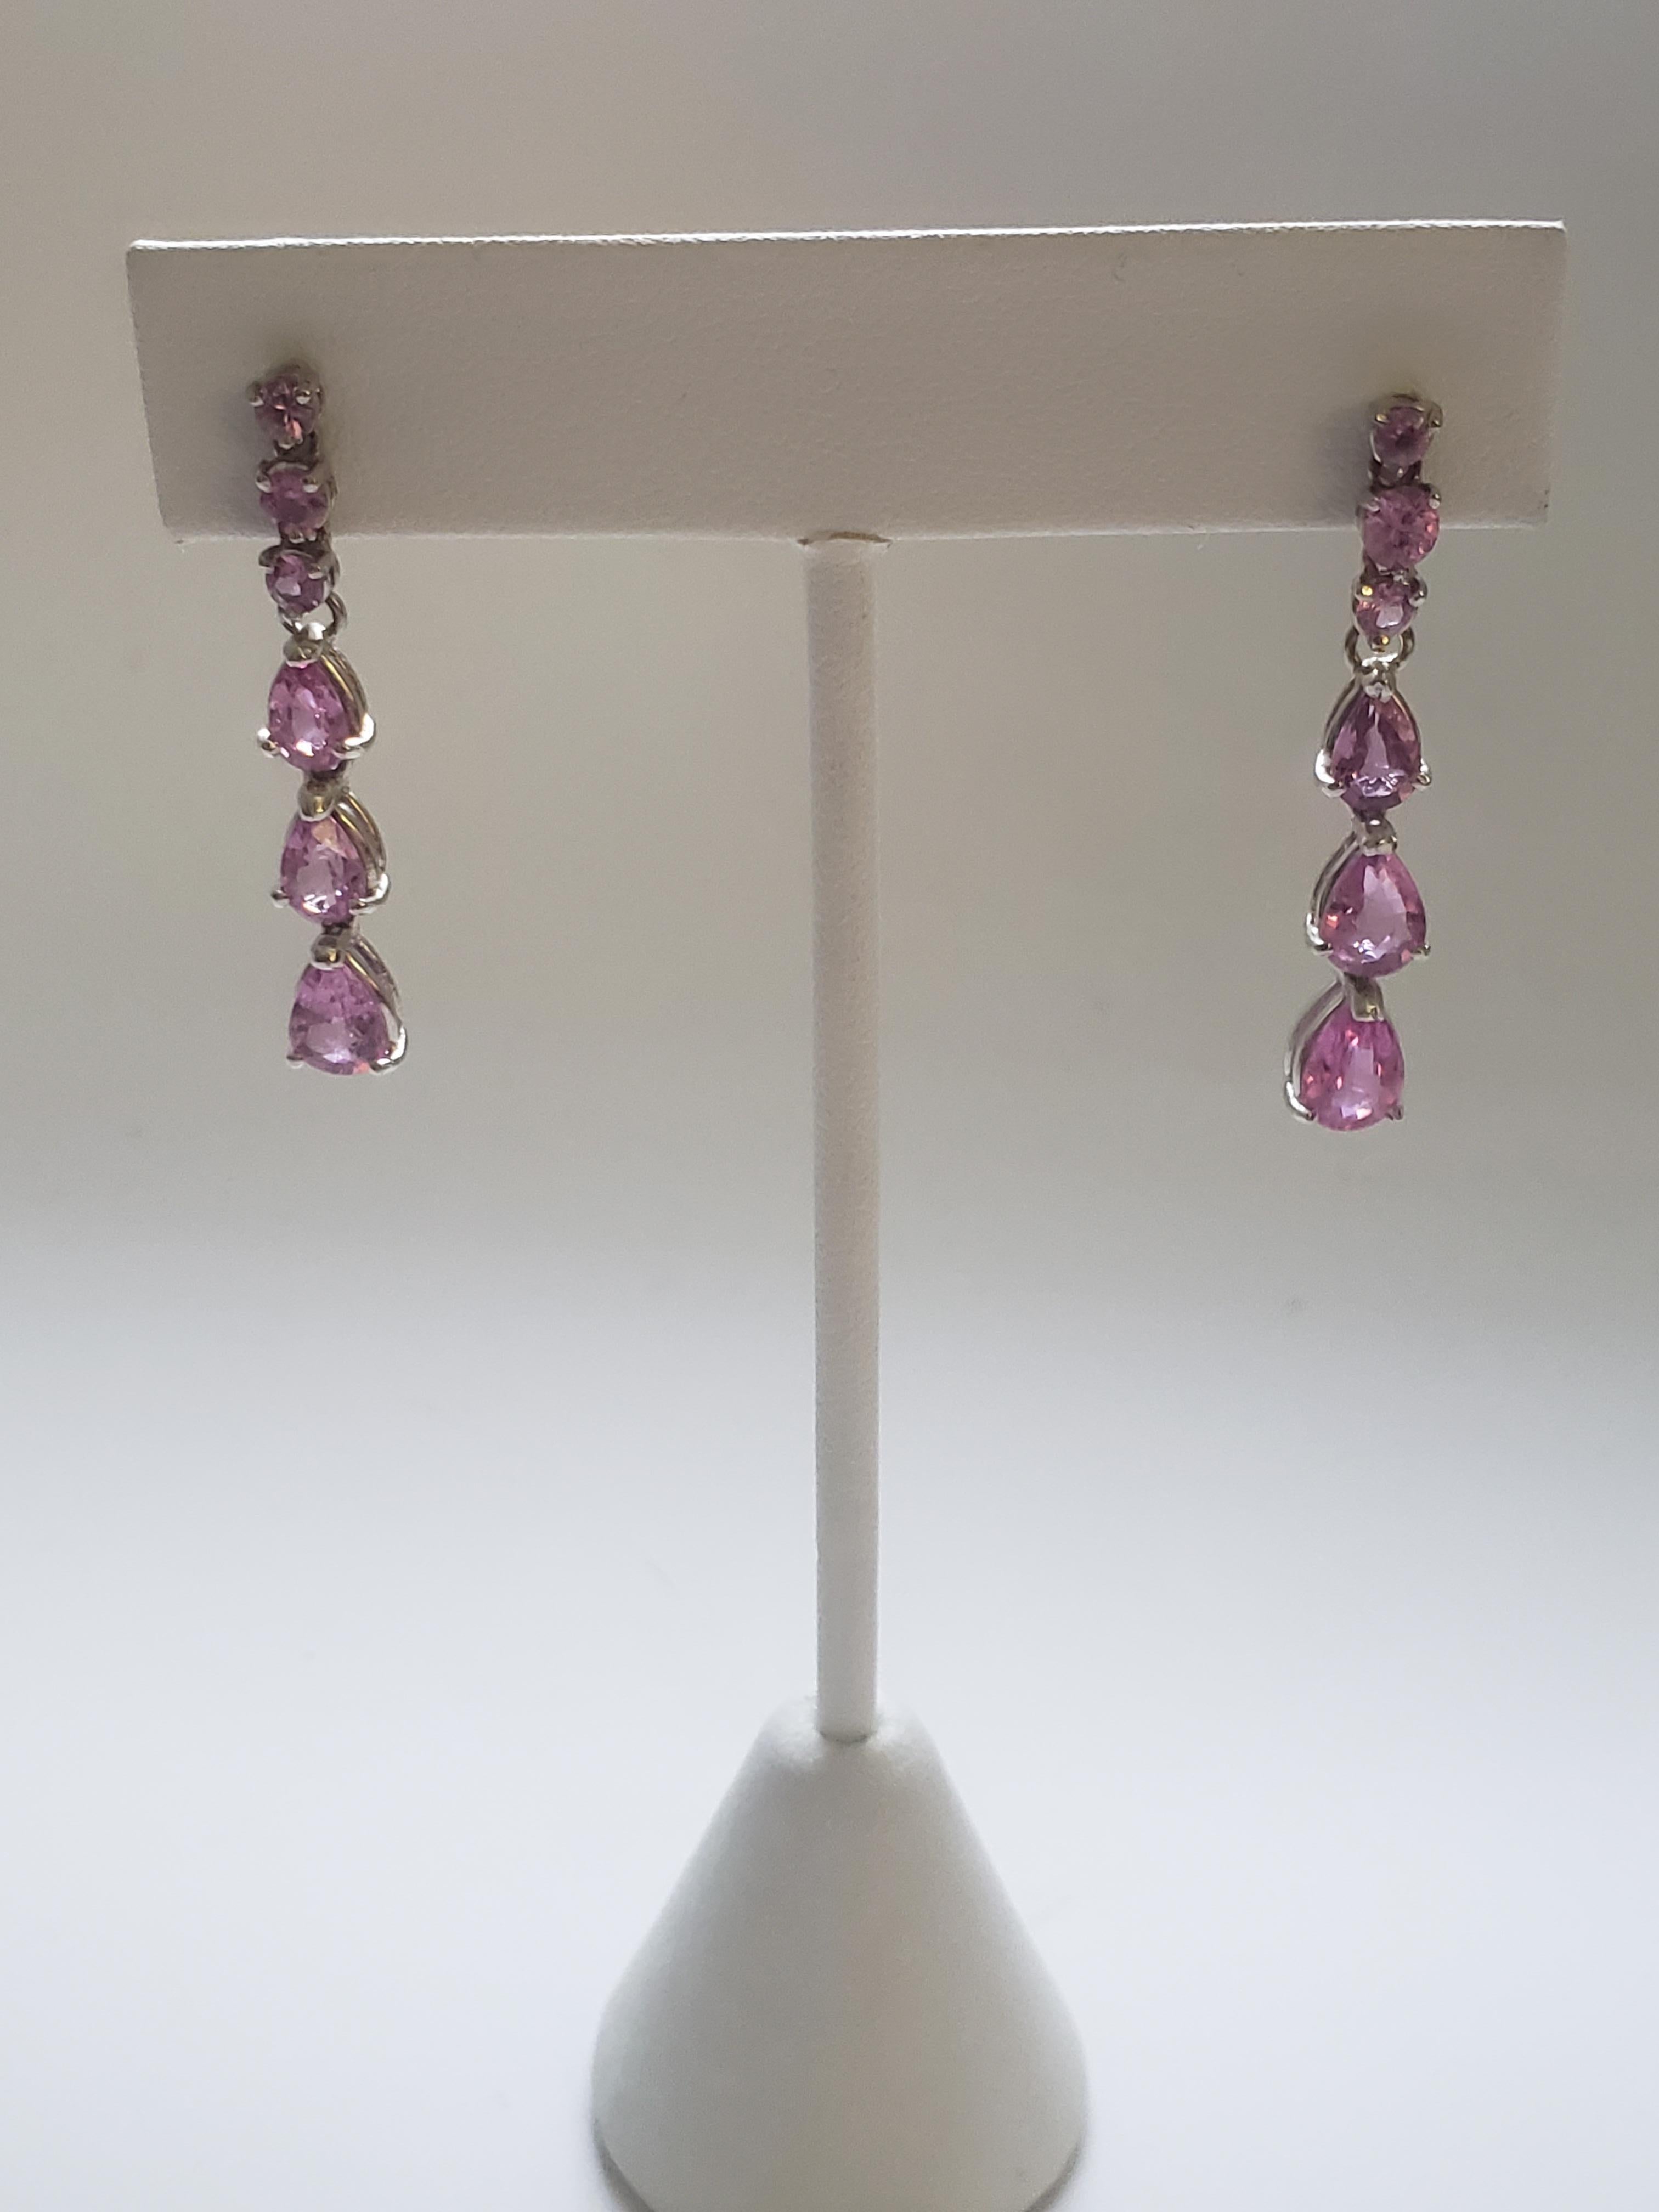 These stunning earrings are a beautiful addition to any jewelry collection. Crafted with 18k white gold and featuring natural hot pink sapphire stones, they exude beauty and elegance. The LaFrancee brand ensures that these earrings are of the